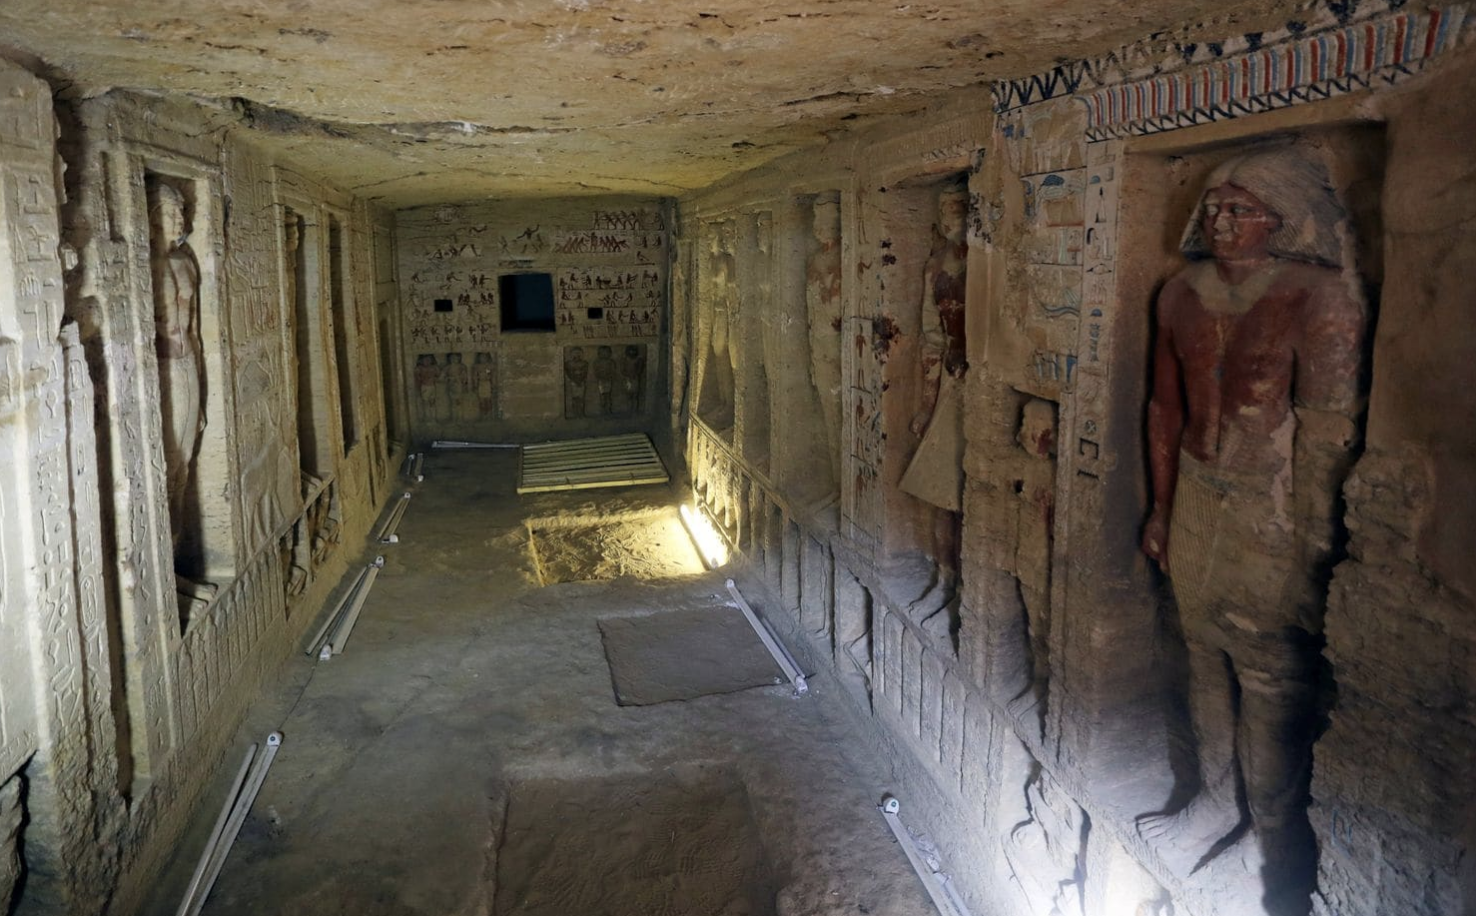 Egypt Antiquity Antiquities Egyptology King Found Discovered Uncovered Ancient Statue Tomb Dating Dynasty Temple Archaeological Egyptian Discovery Tombs Mummies Ramses Dates Aswan Mission Statues Remains Sarcophagus Giza Sarcophagus Gold Coin